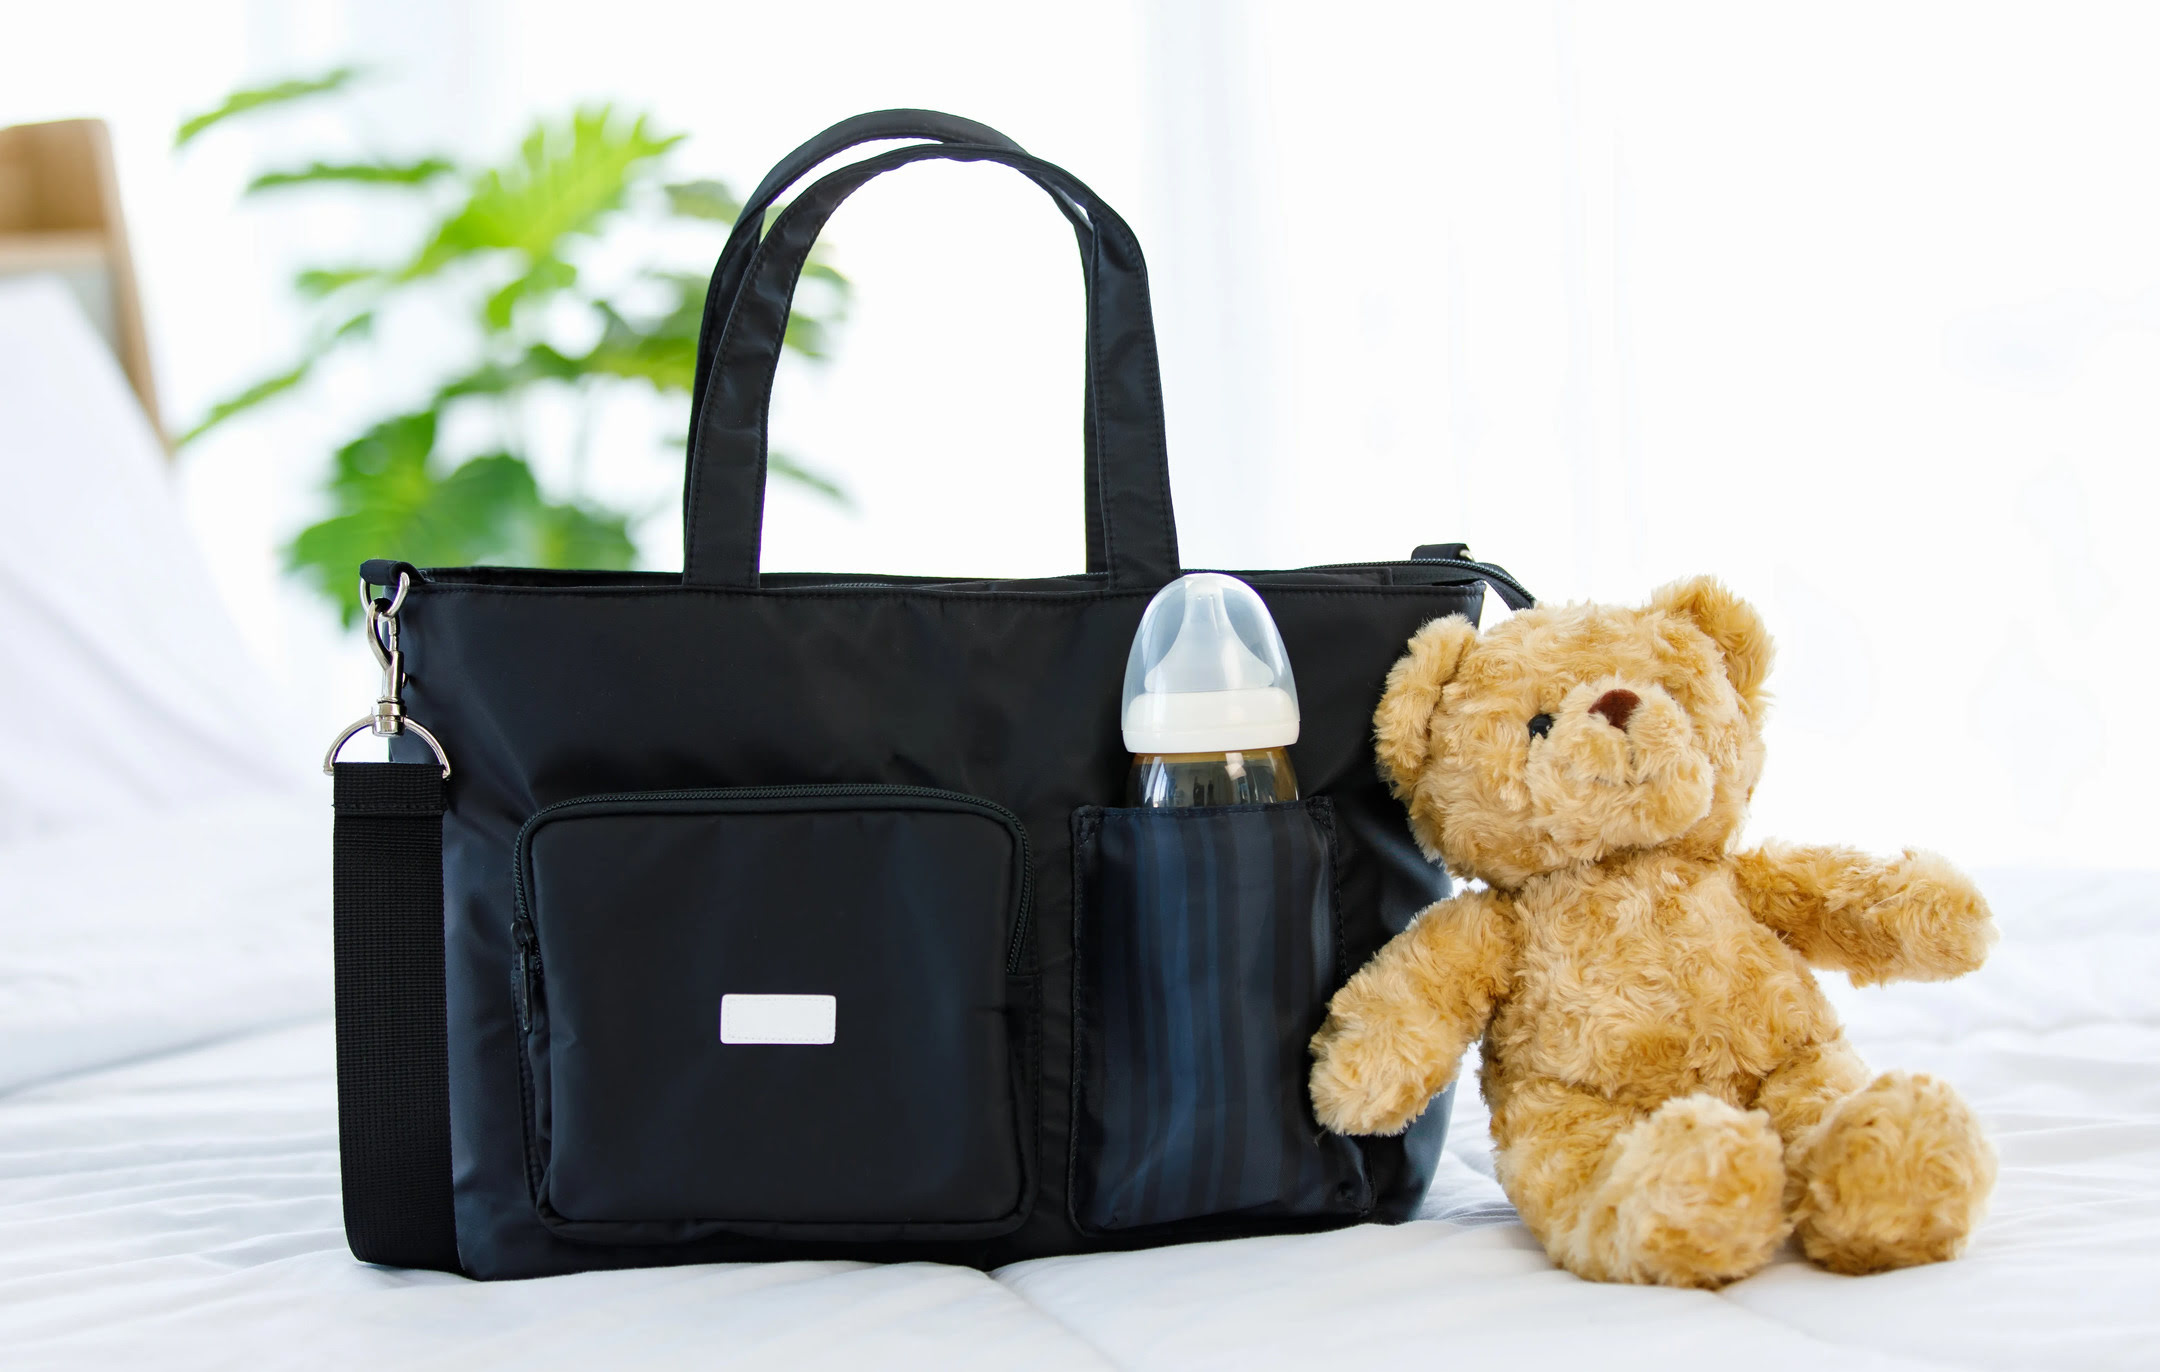 Diaper Bag Review: The Perfect Companion for Busy Parents